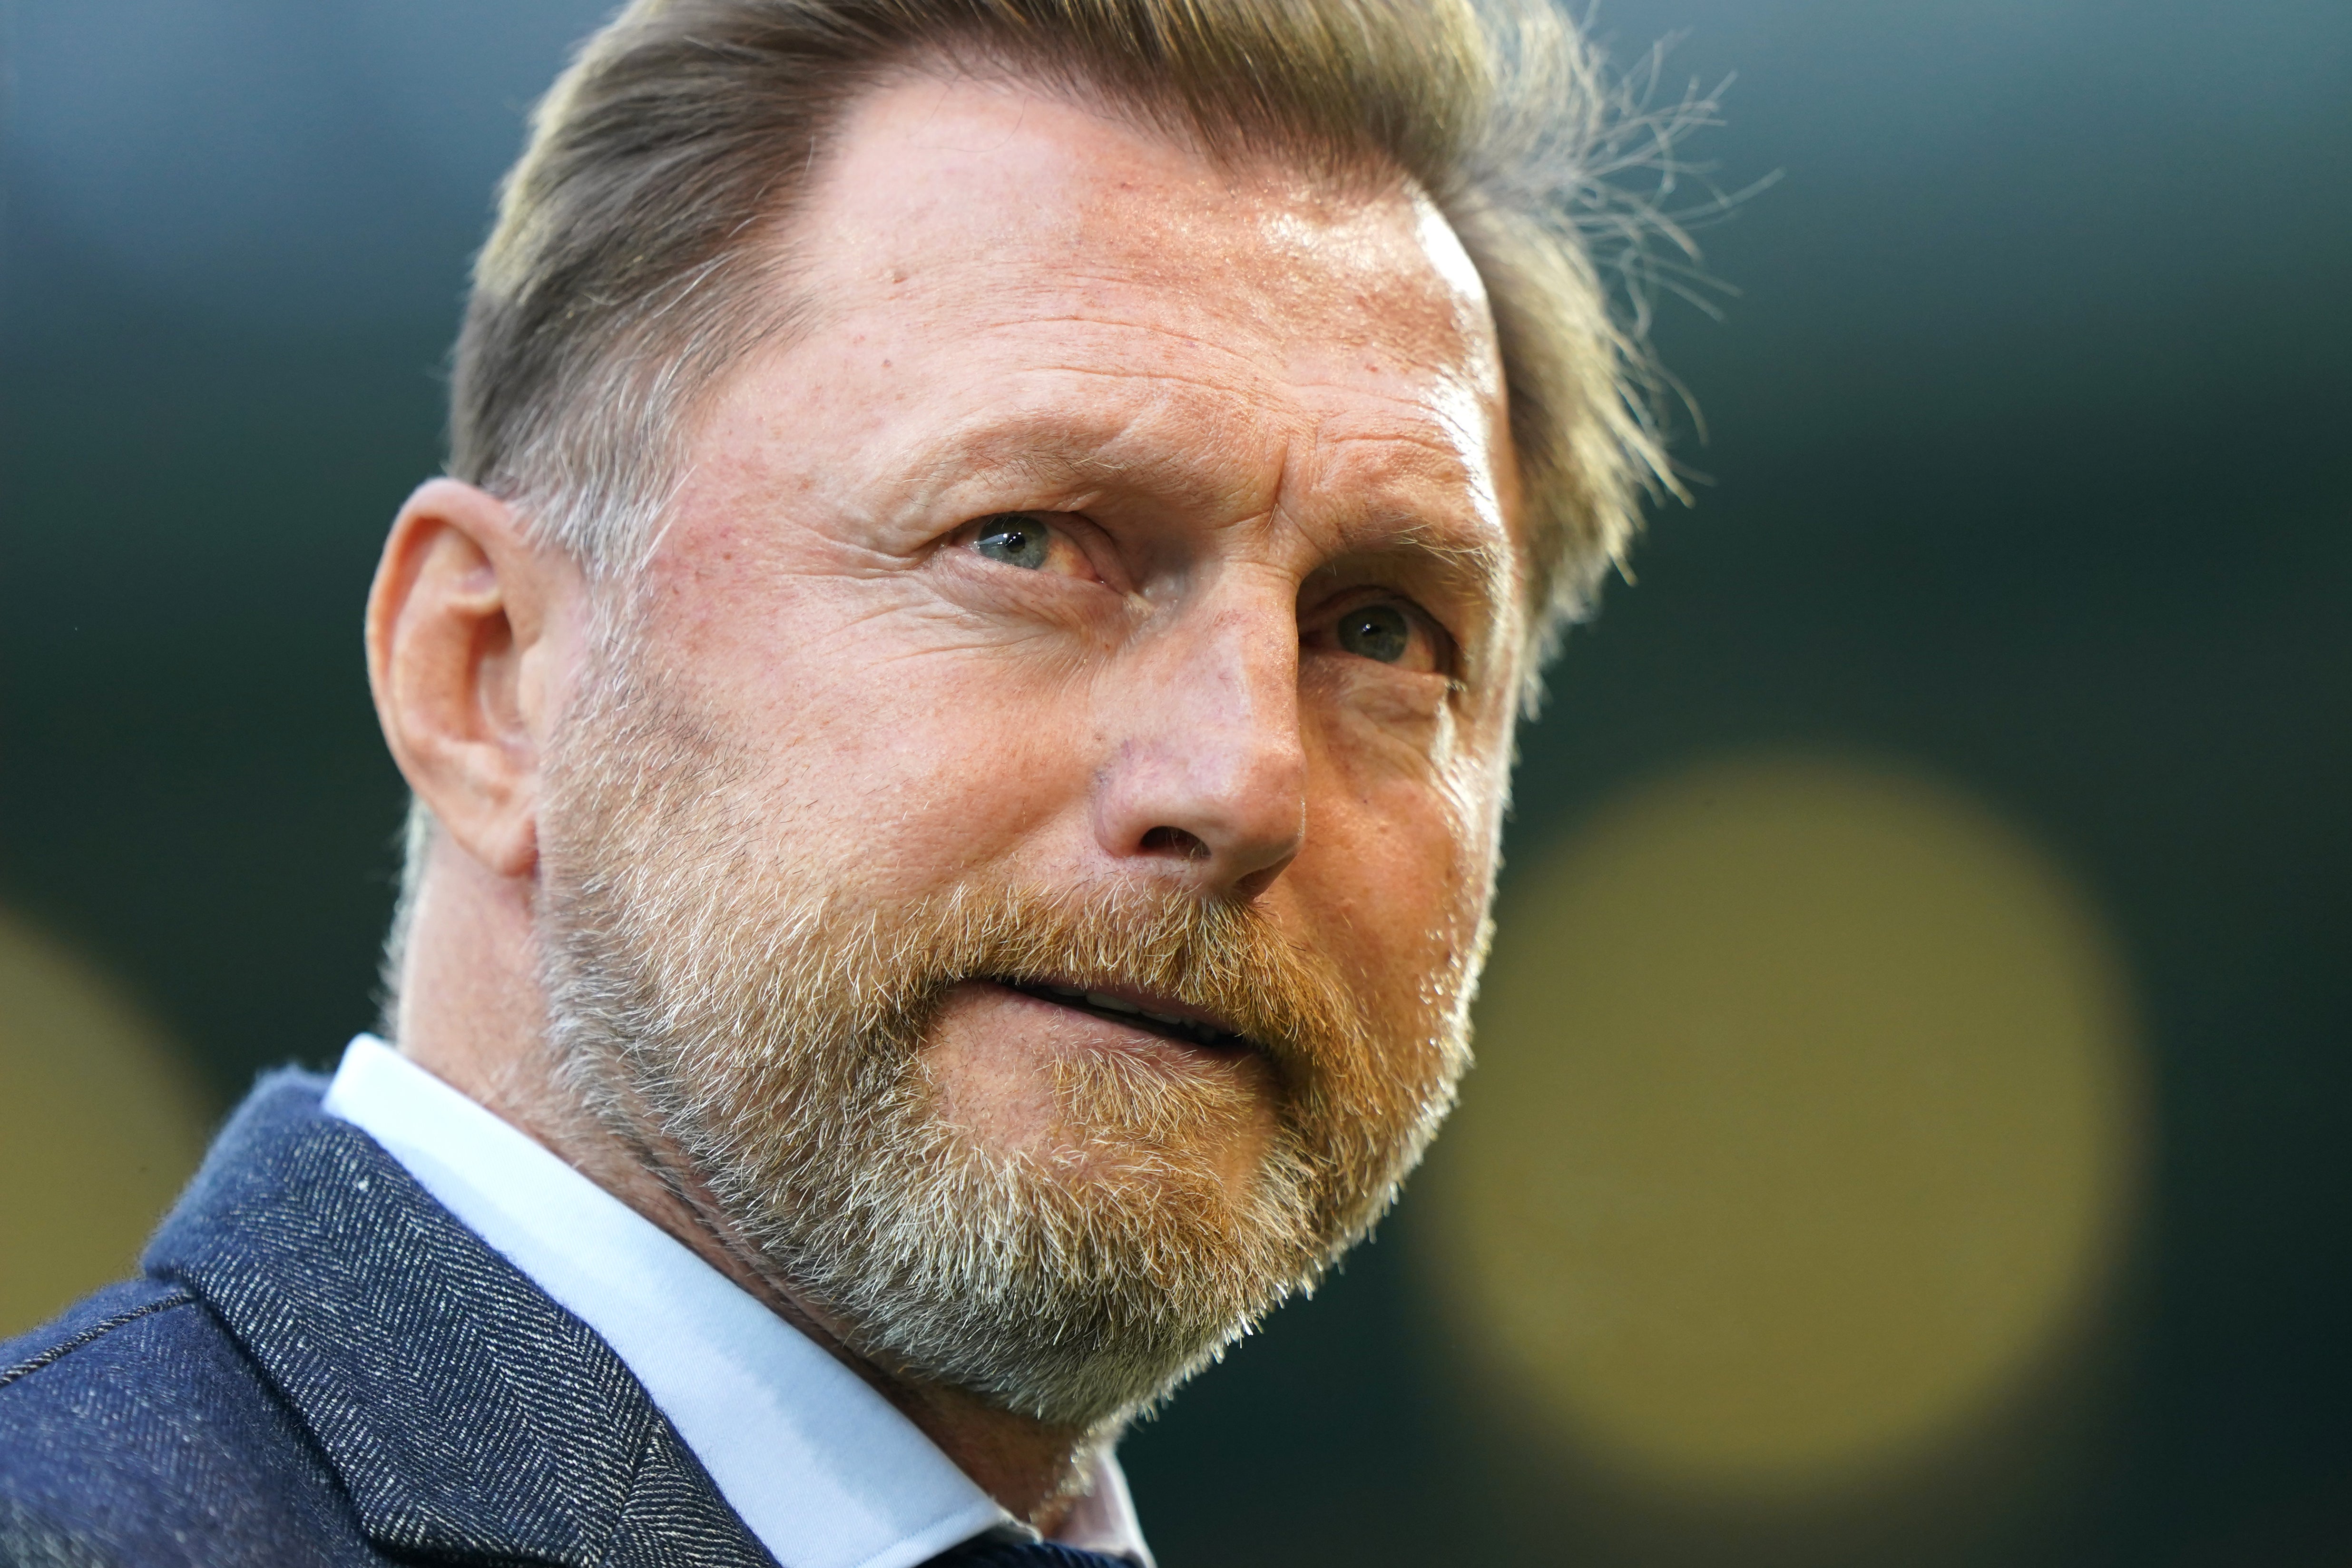 Southampton manager Ralph Hasenhuttl is targeting a top-10 finish